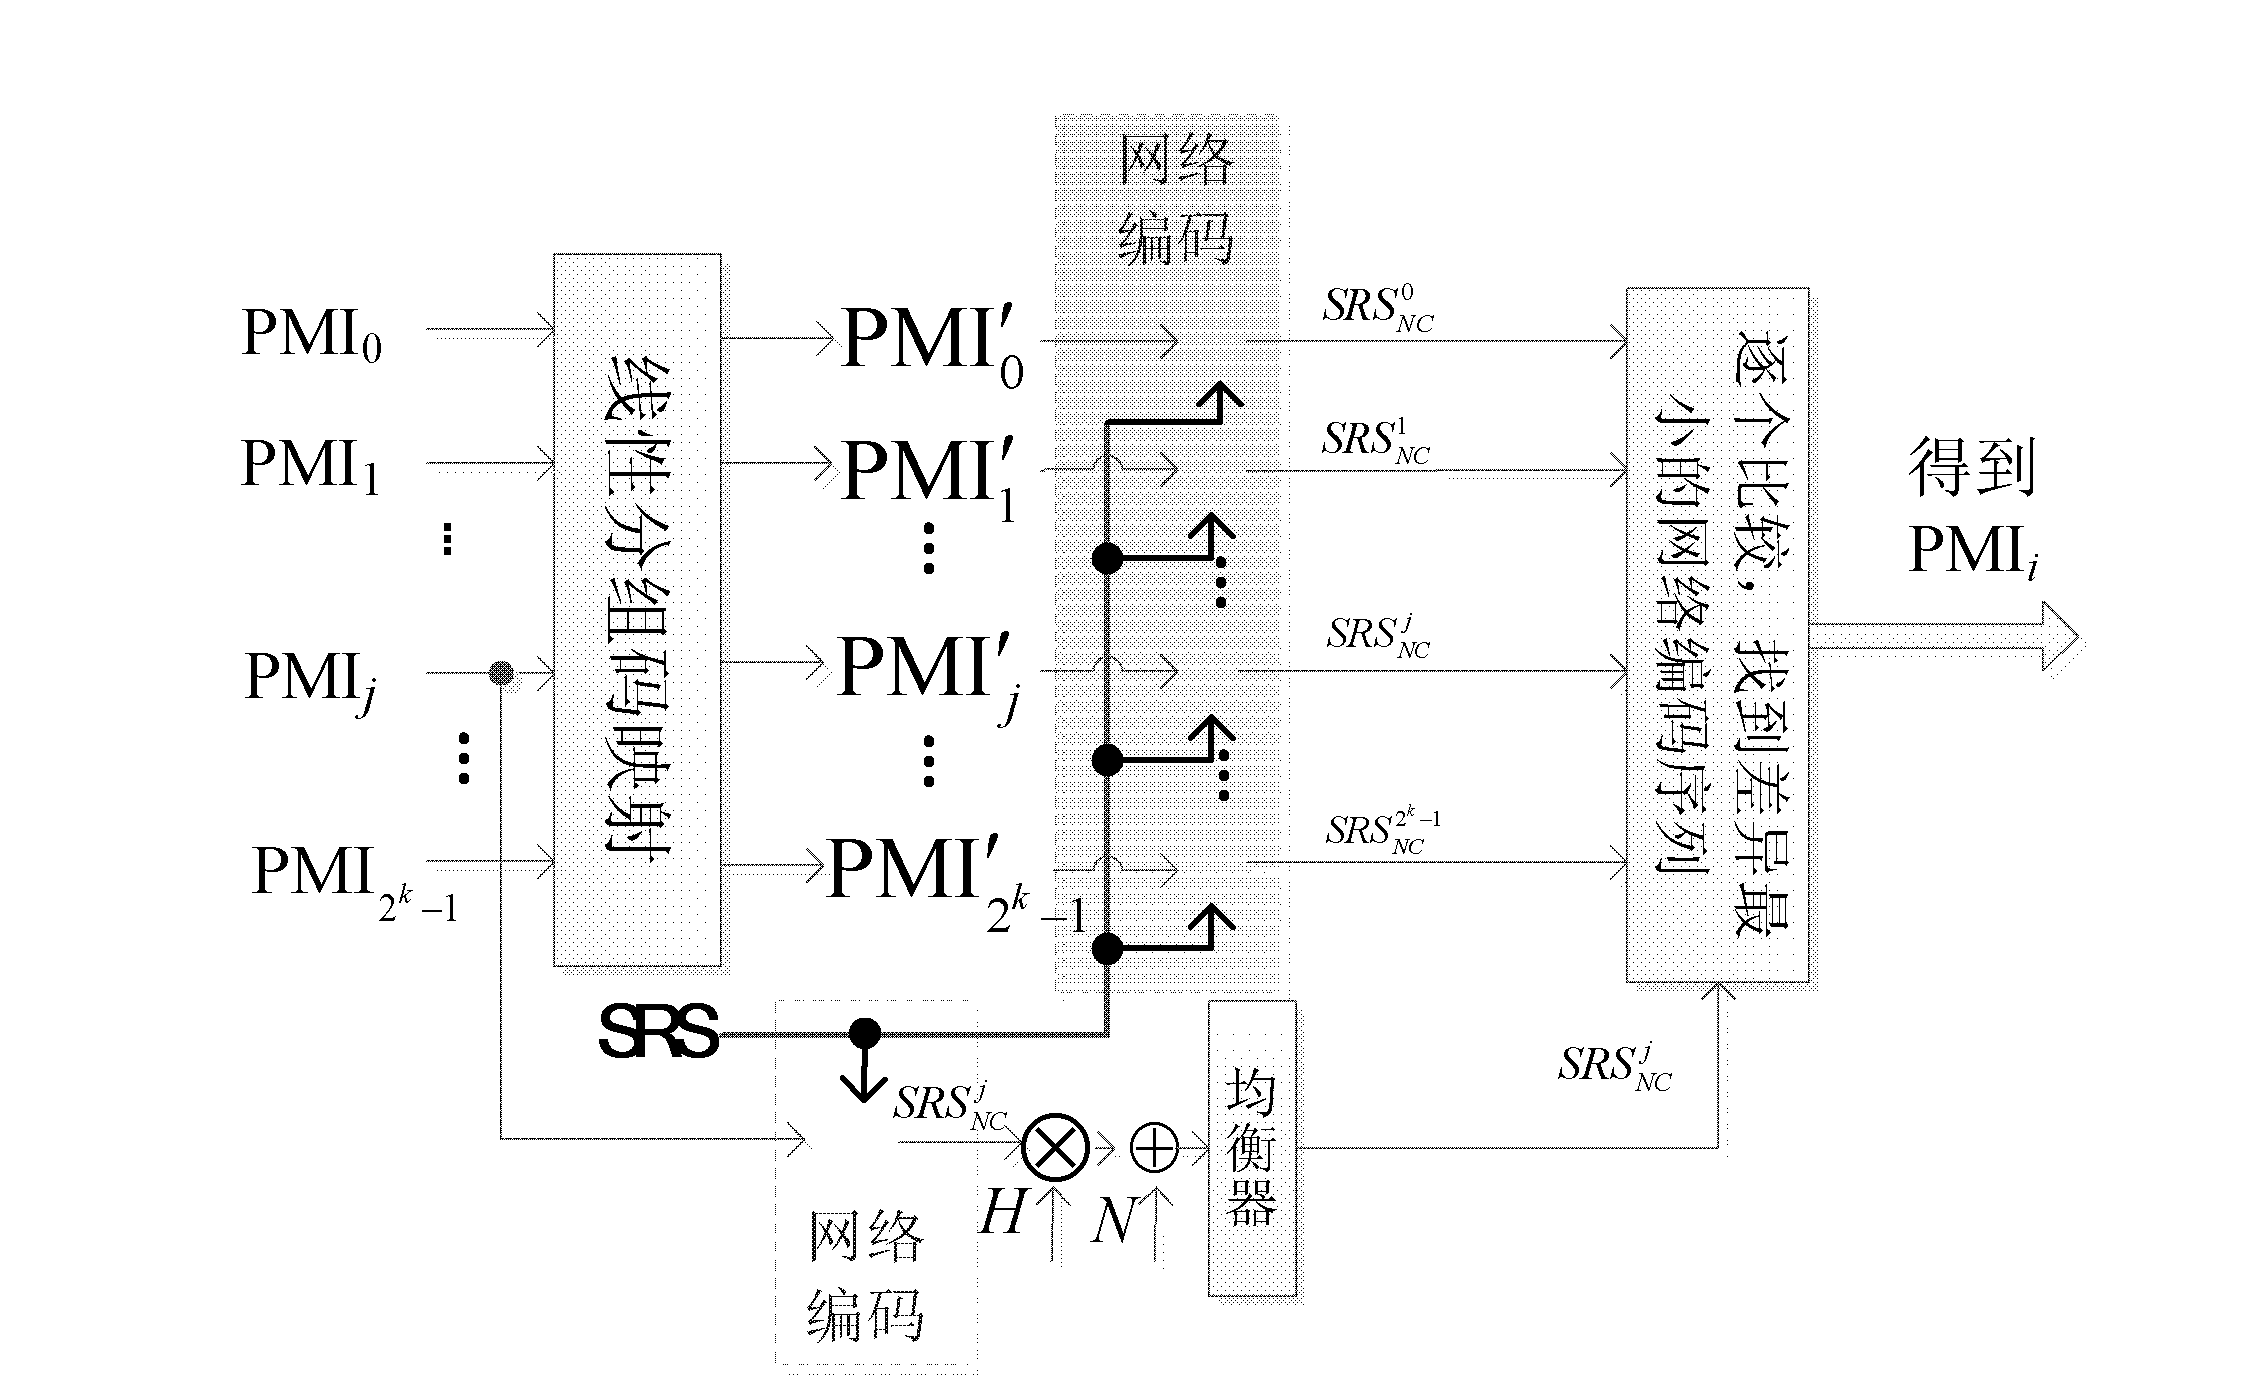 Network coding feedback method for coordinated multi-point transmission system